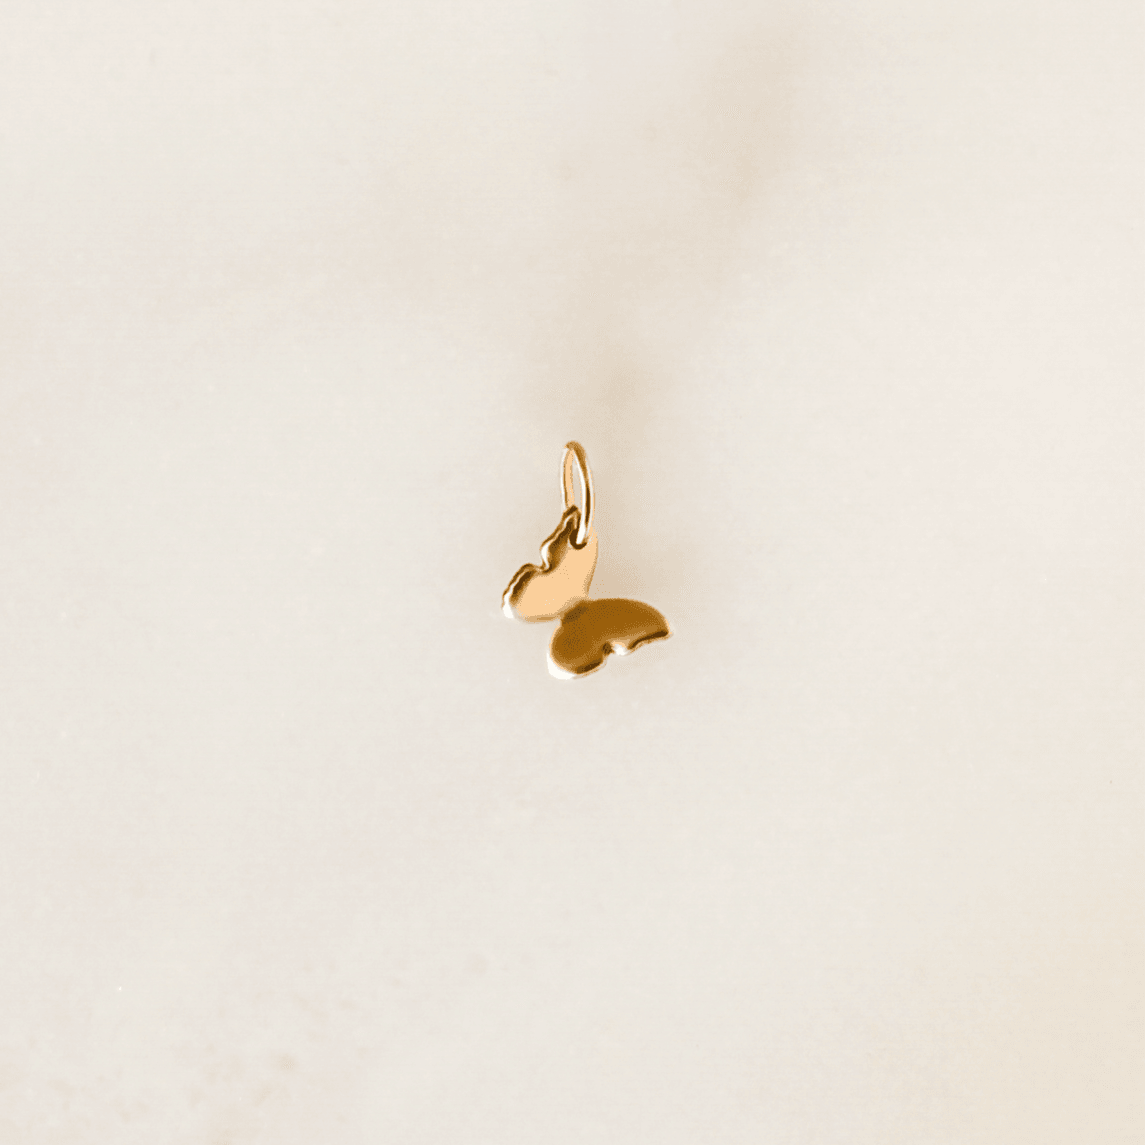 Butterfly Charm • Add On - Nolia Jewelry - Meaningful + Sustainably Handcrafted Jewelry